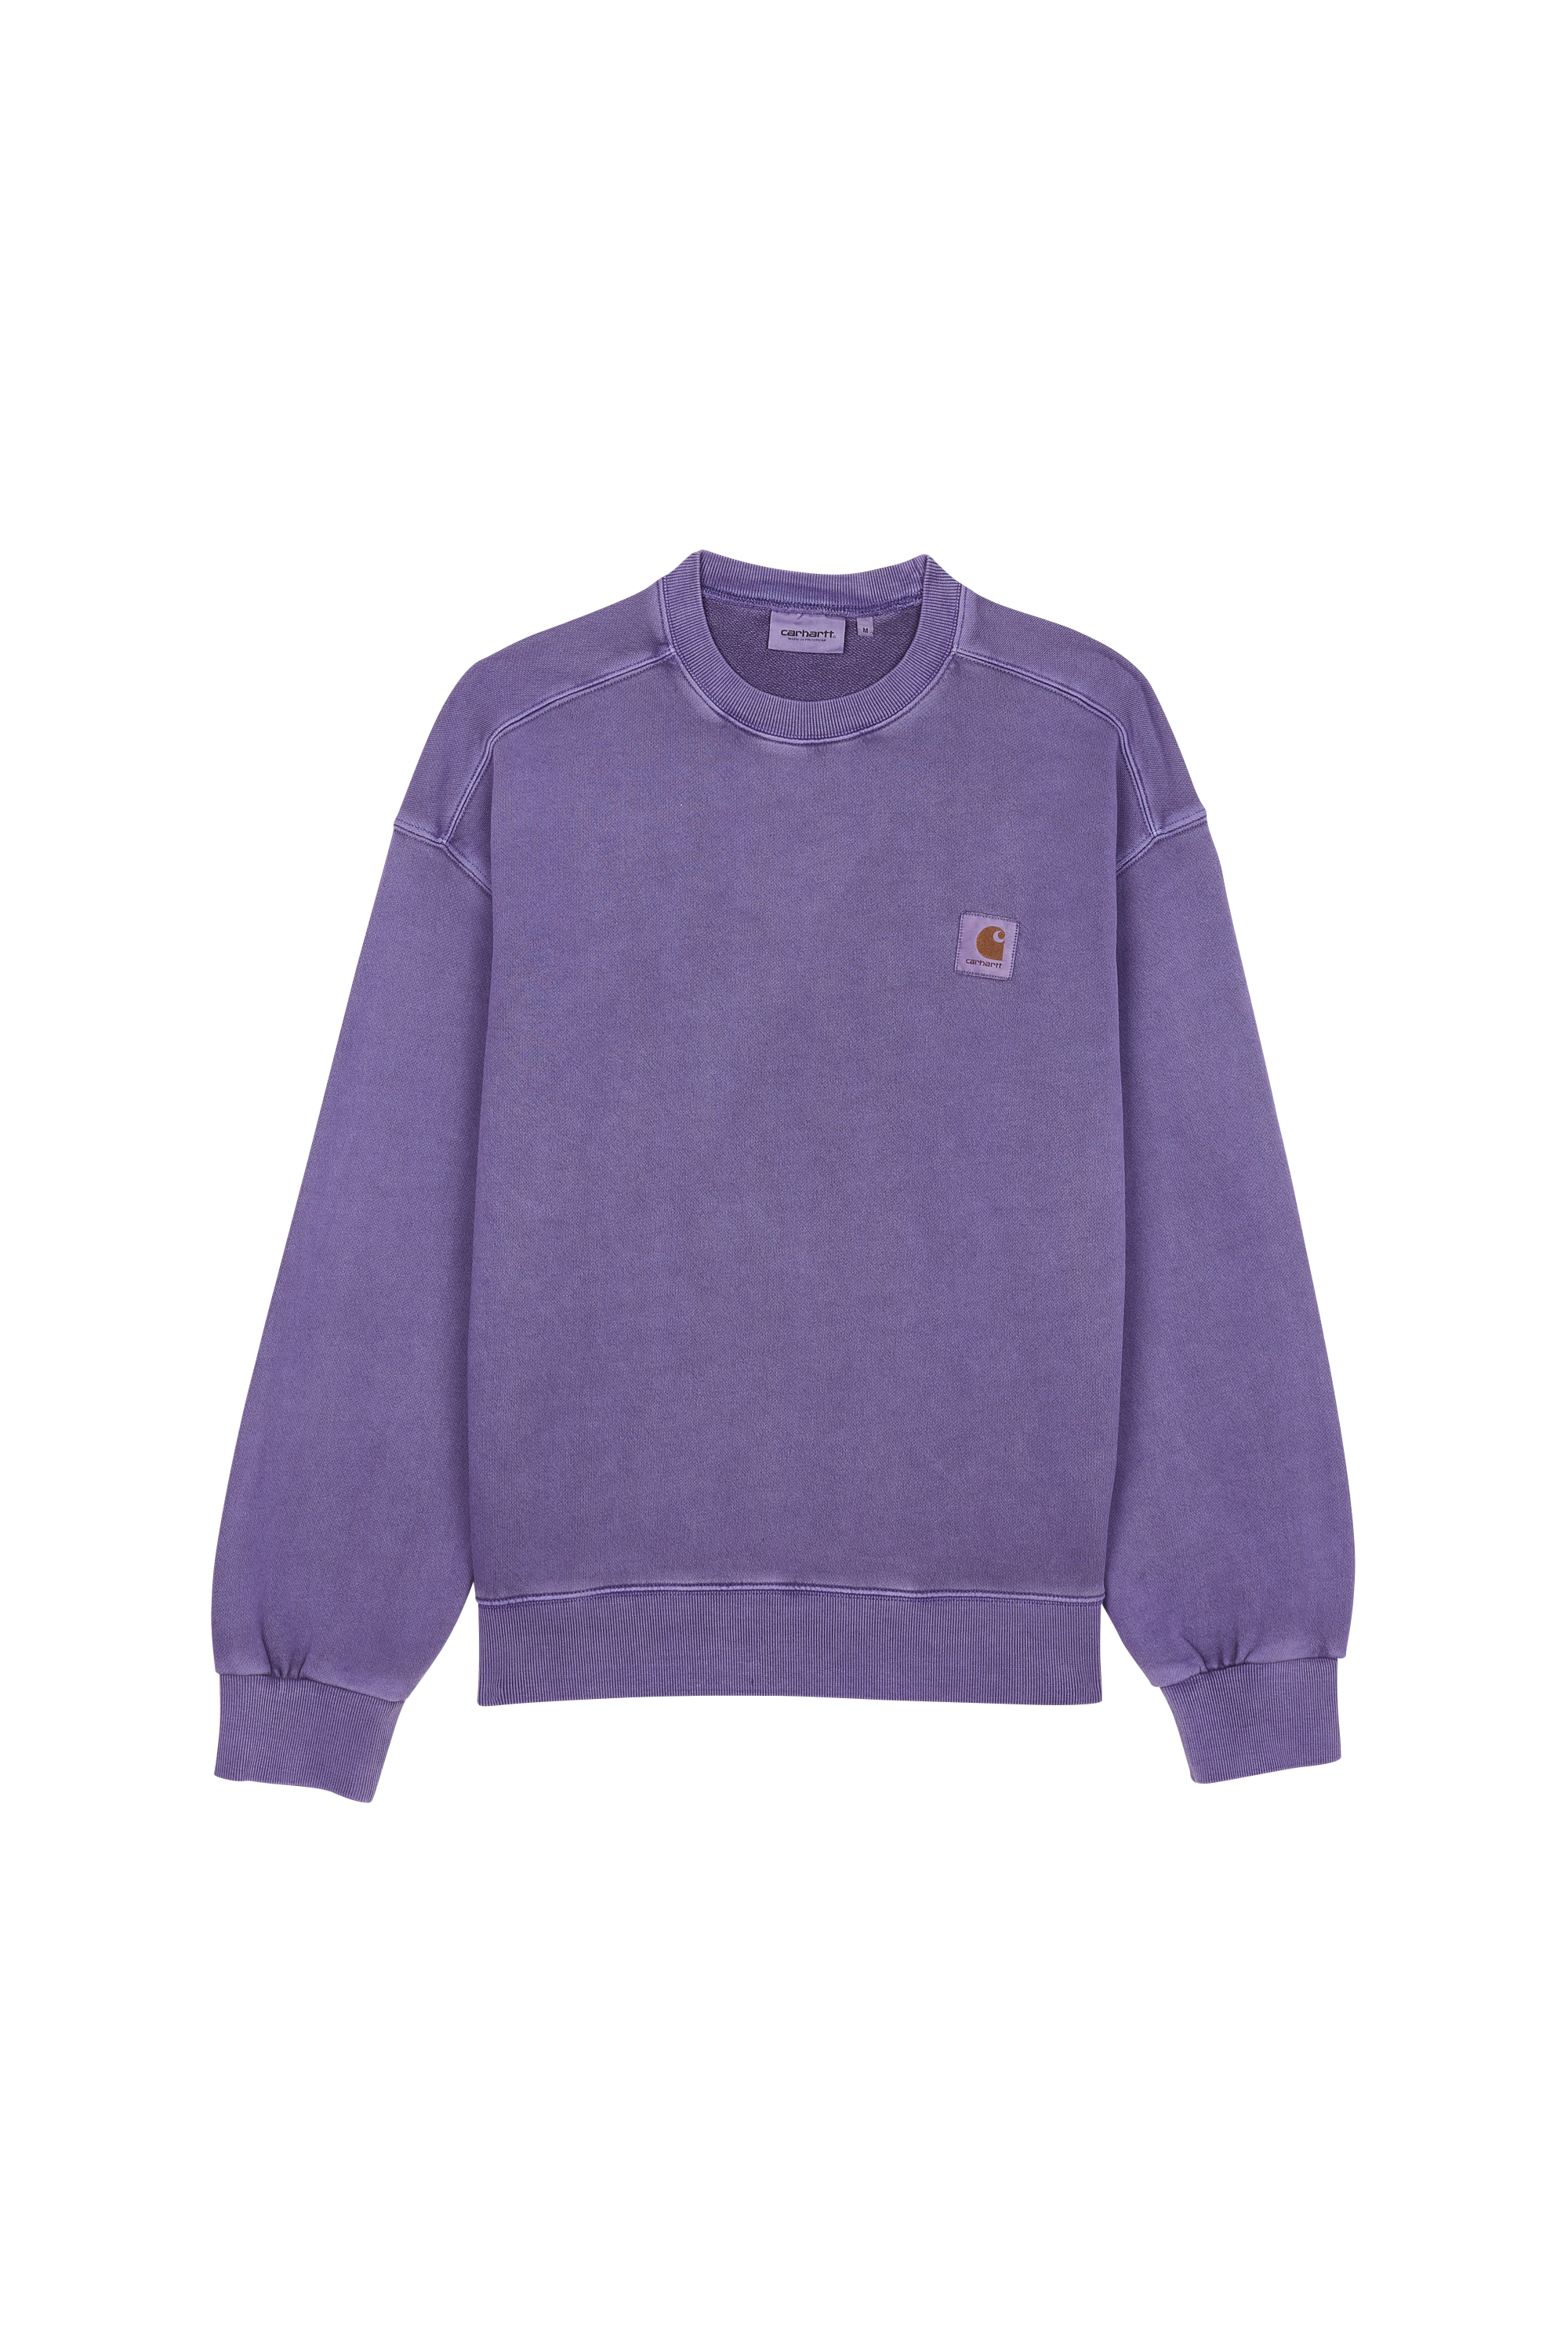 Carhartt Wip - Pull - Taille XS